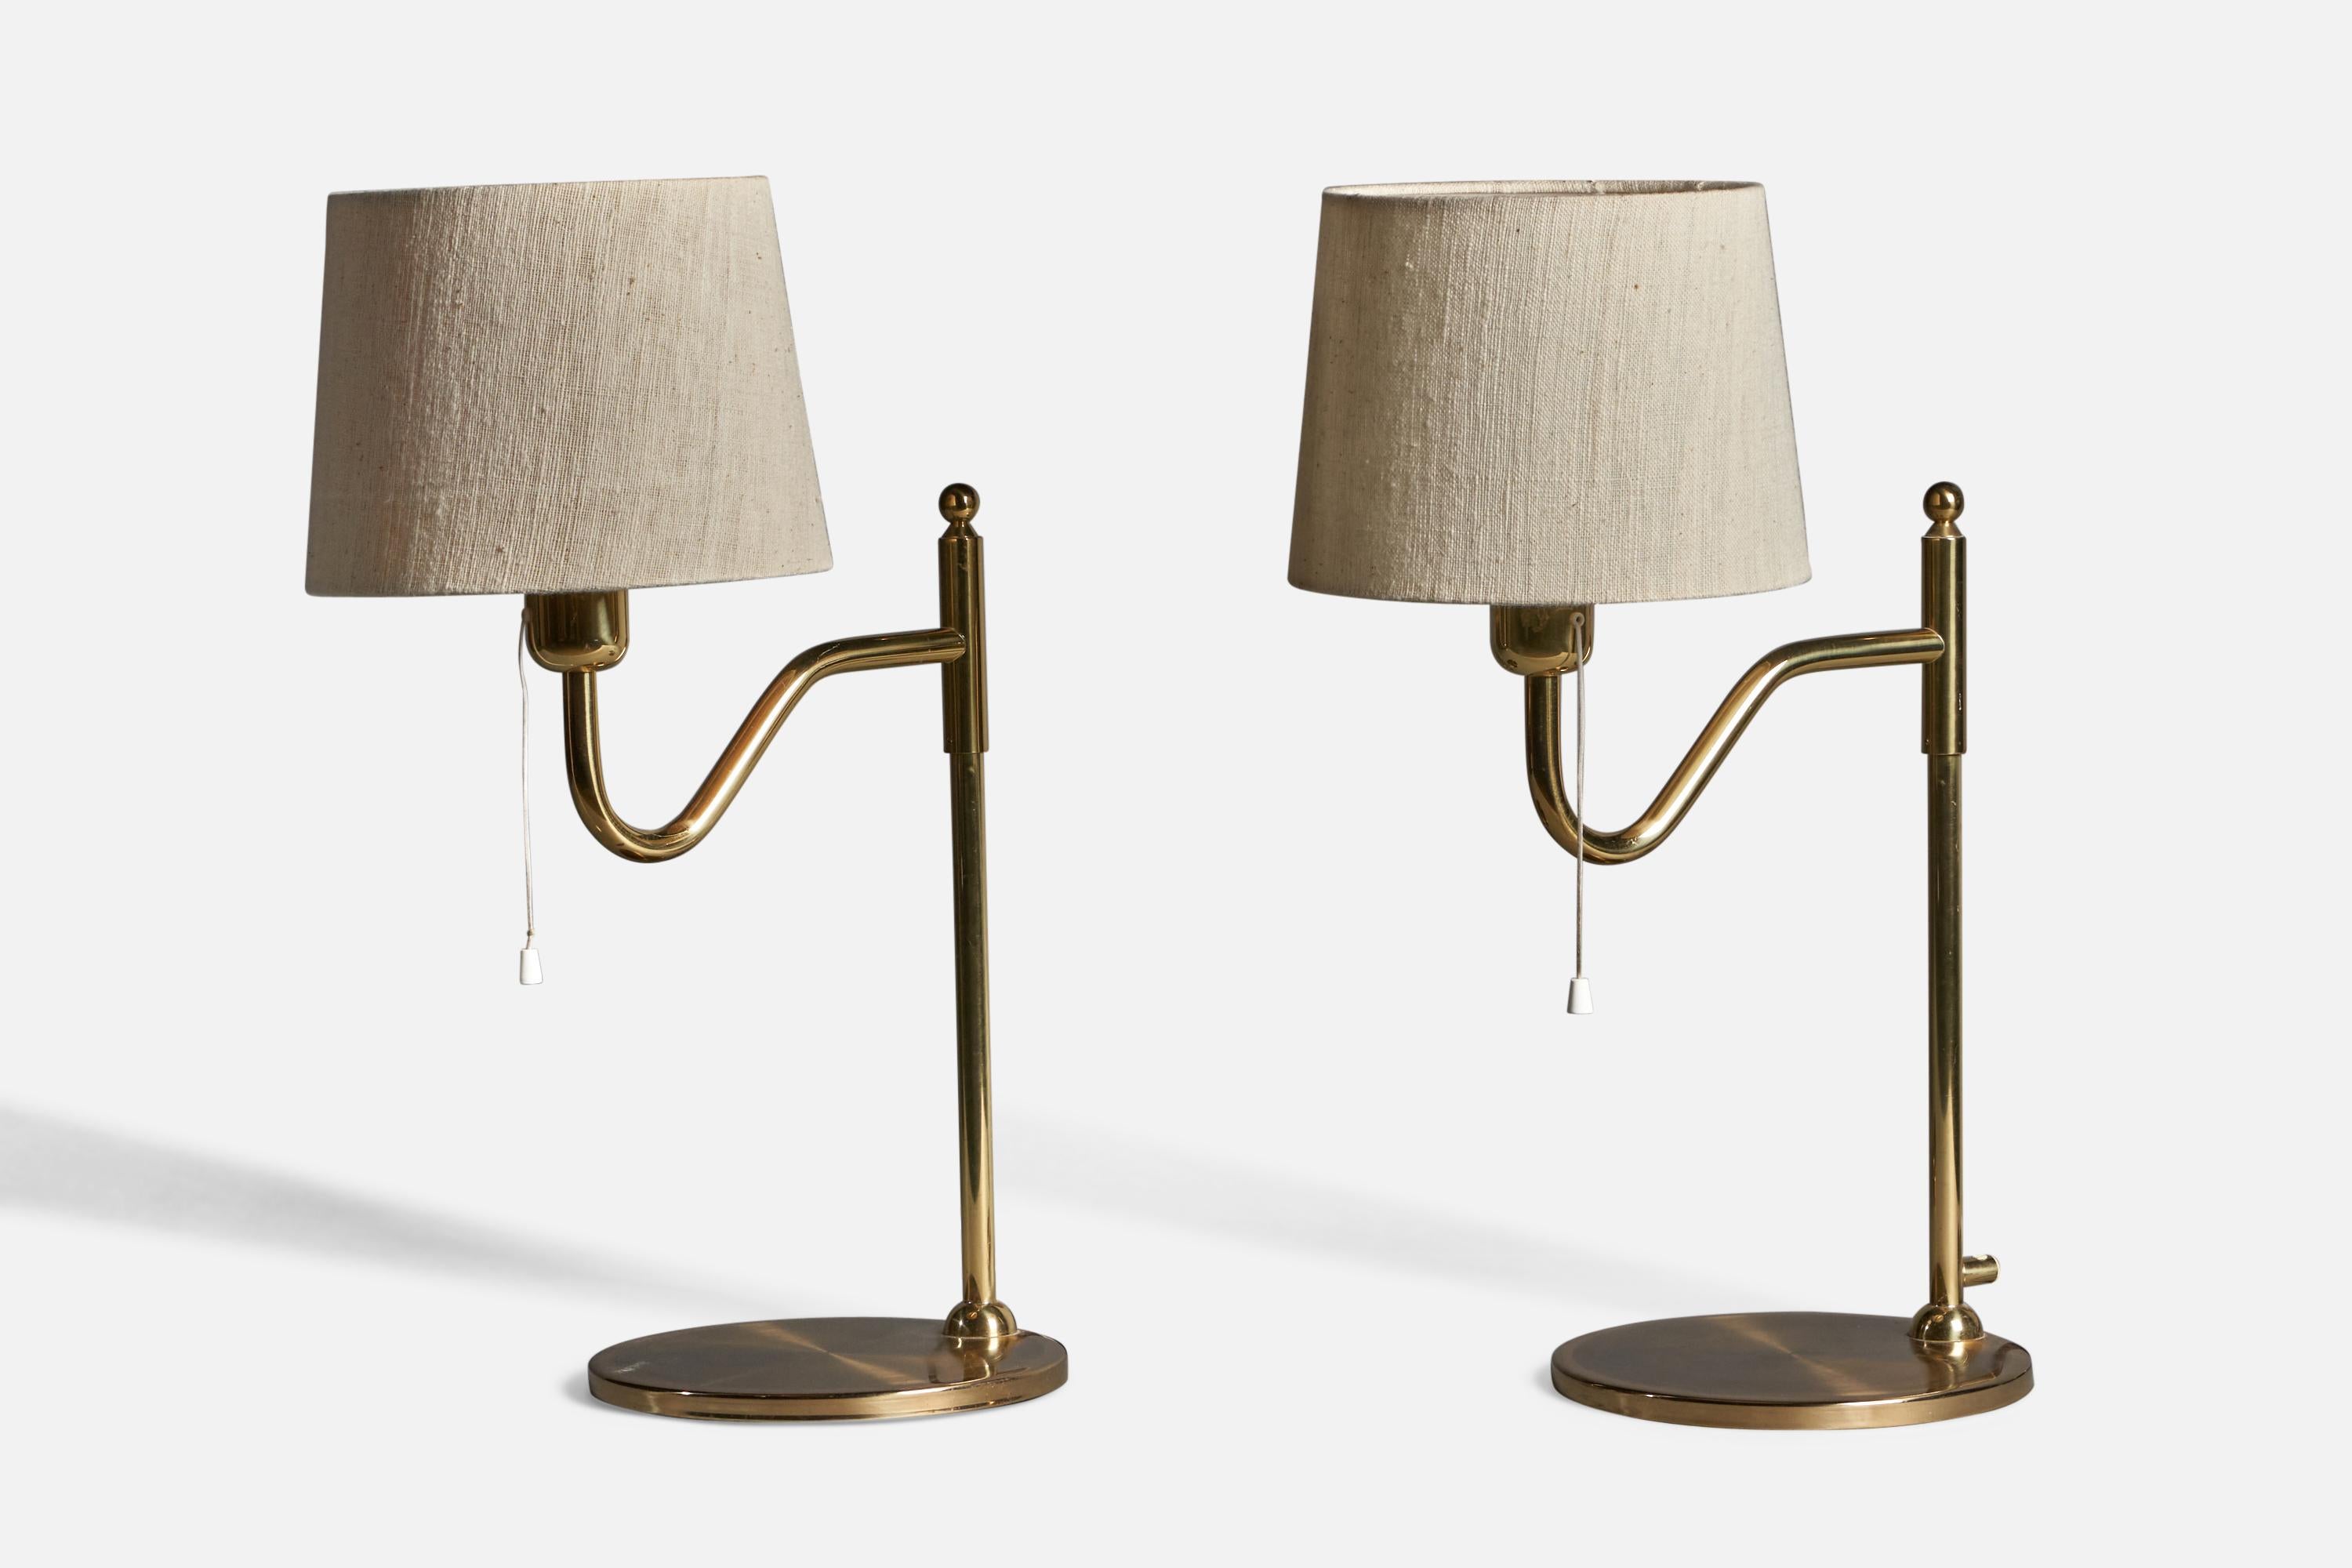 A pair of brass and light beige fabric table lamps, designed and produced by Nya Öia, Sweden, 1970s.

Overall Dimensions (inches): 21.5